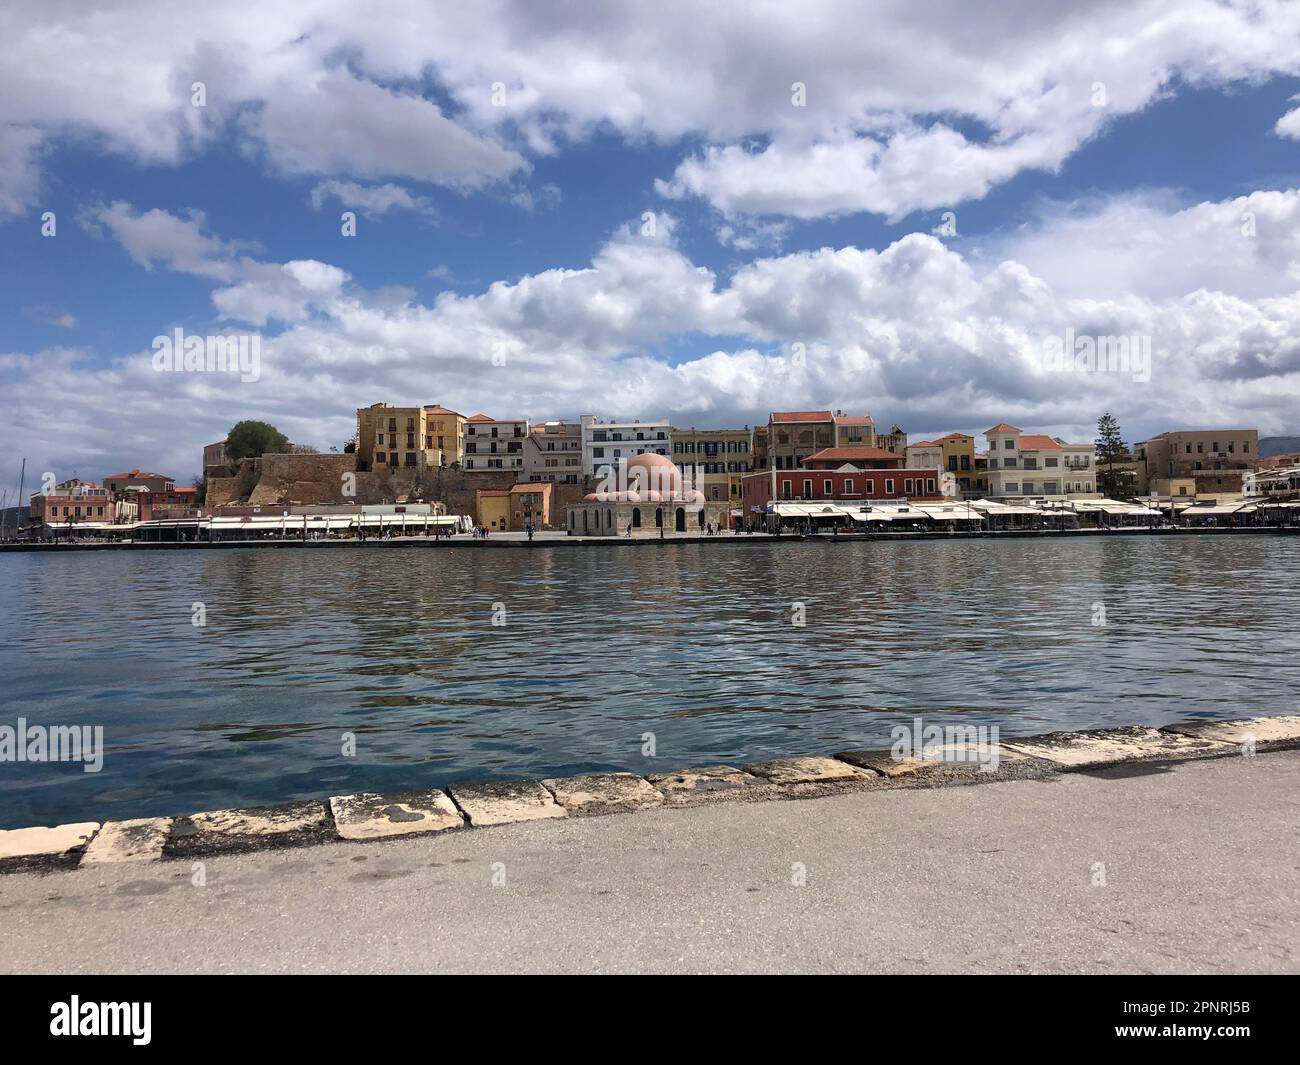 This is a scenic view of the charming old town of Crete, Greece Stock Photo